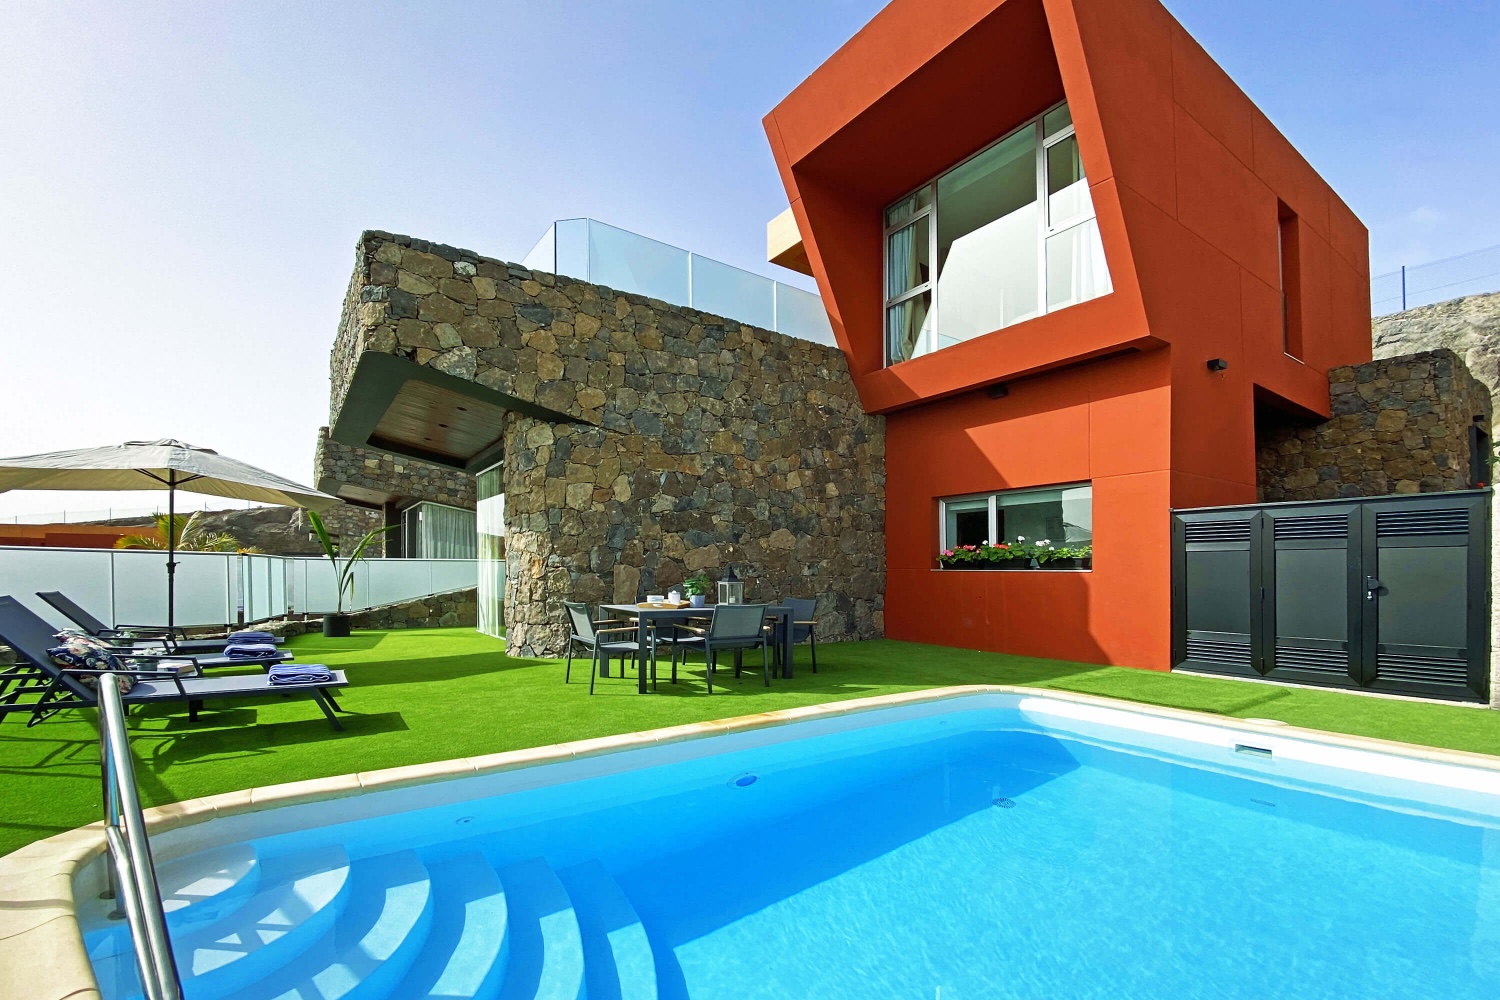 NEW OPENING: Modern and bright villa, fully equipped, perfect for enjoying the good weather in the south of Gran Canaria in a unique setting.